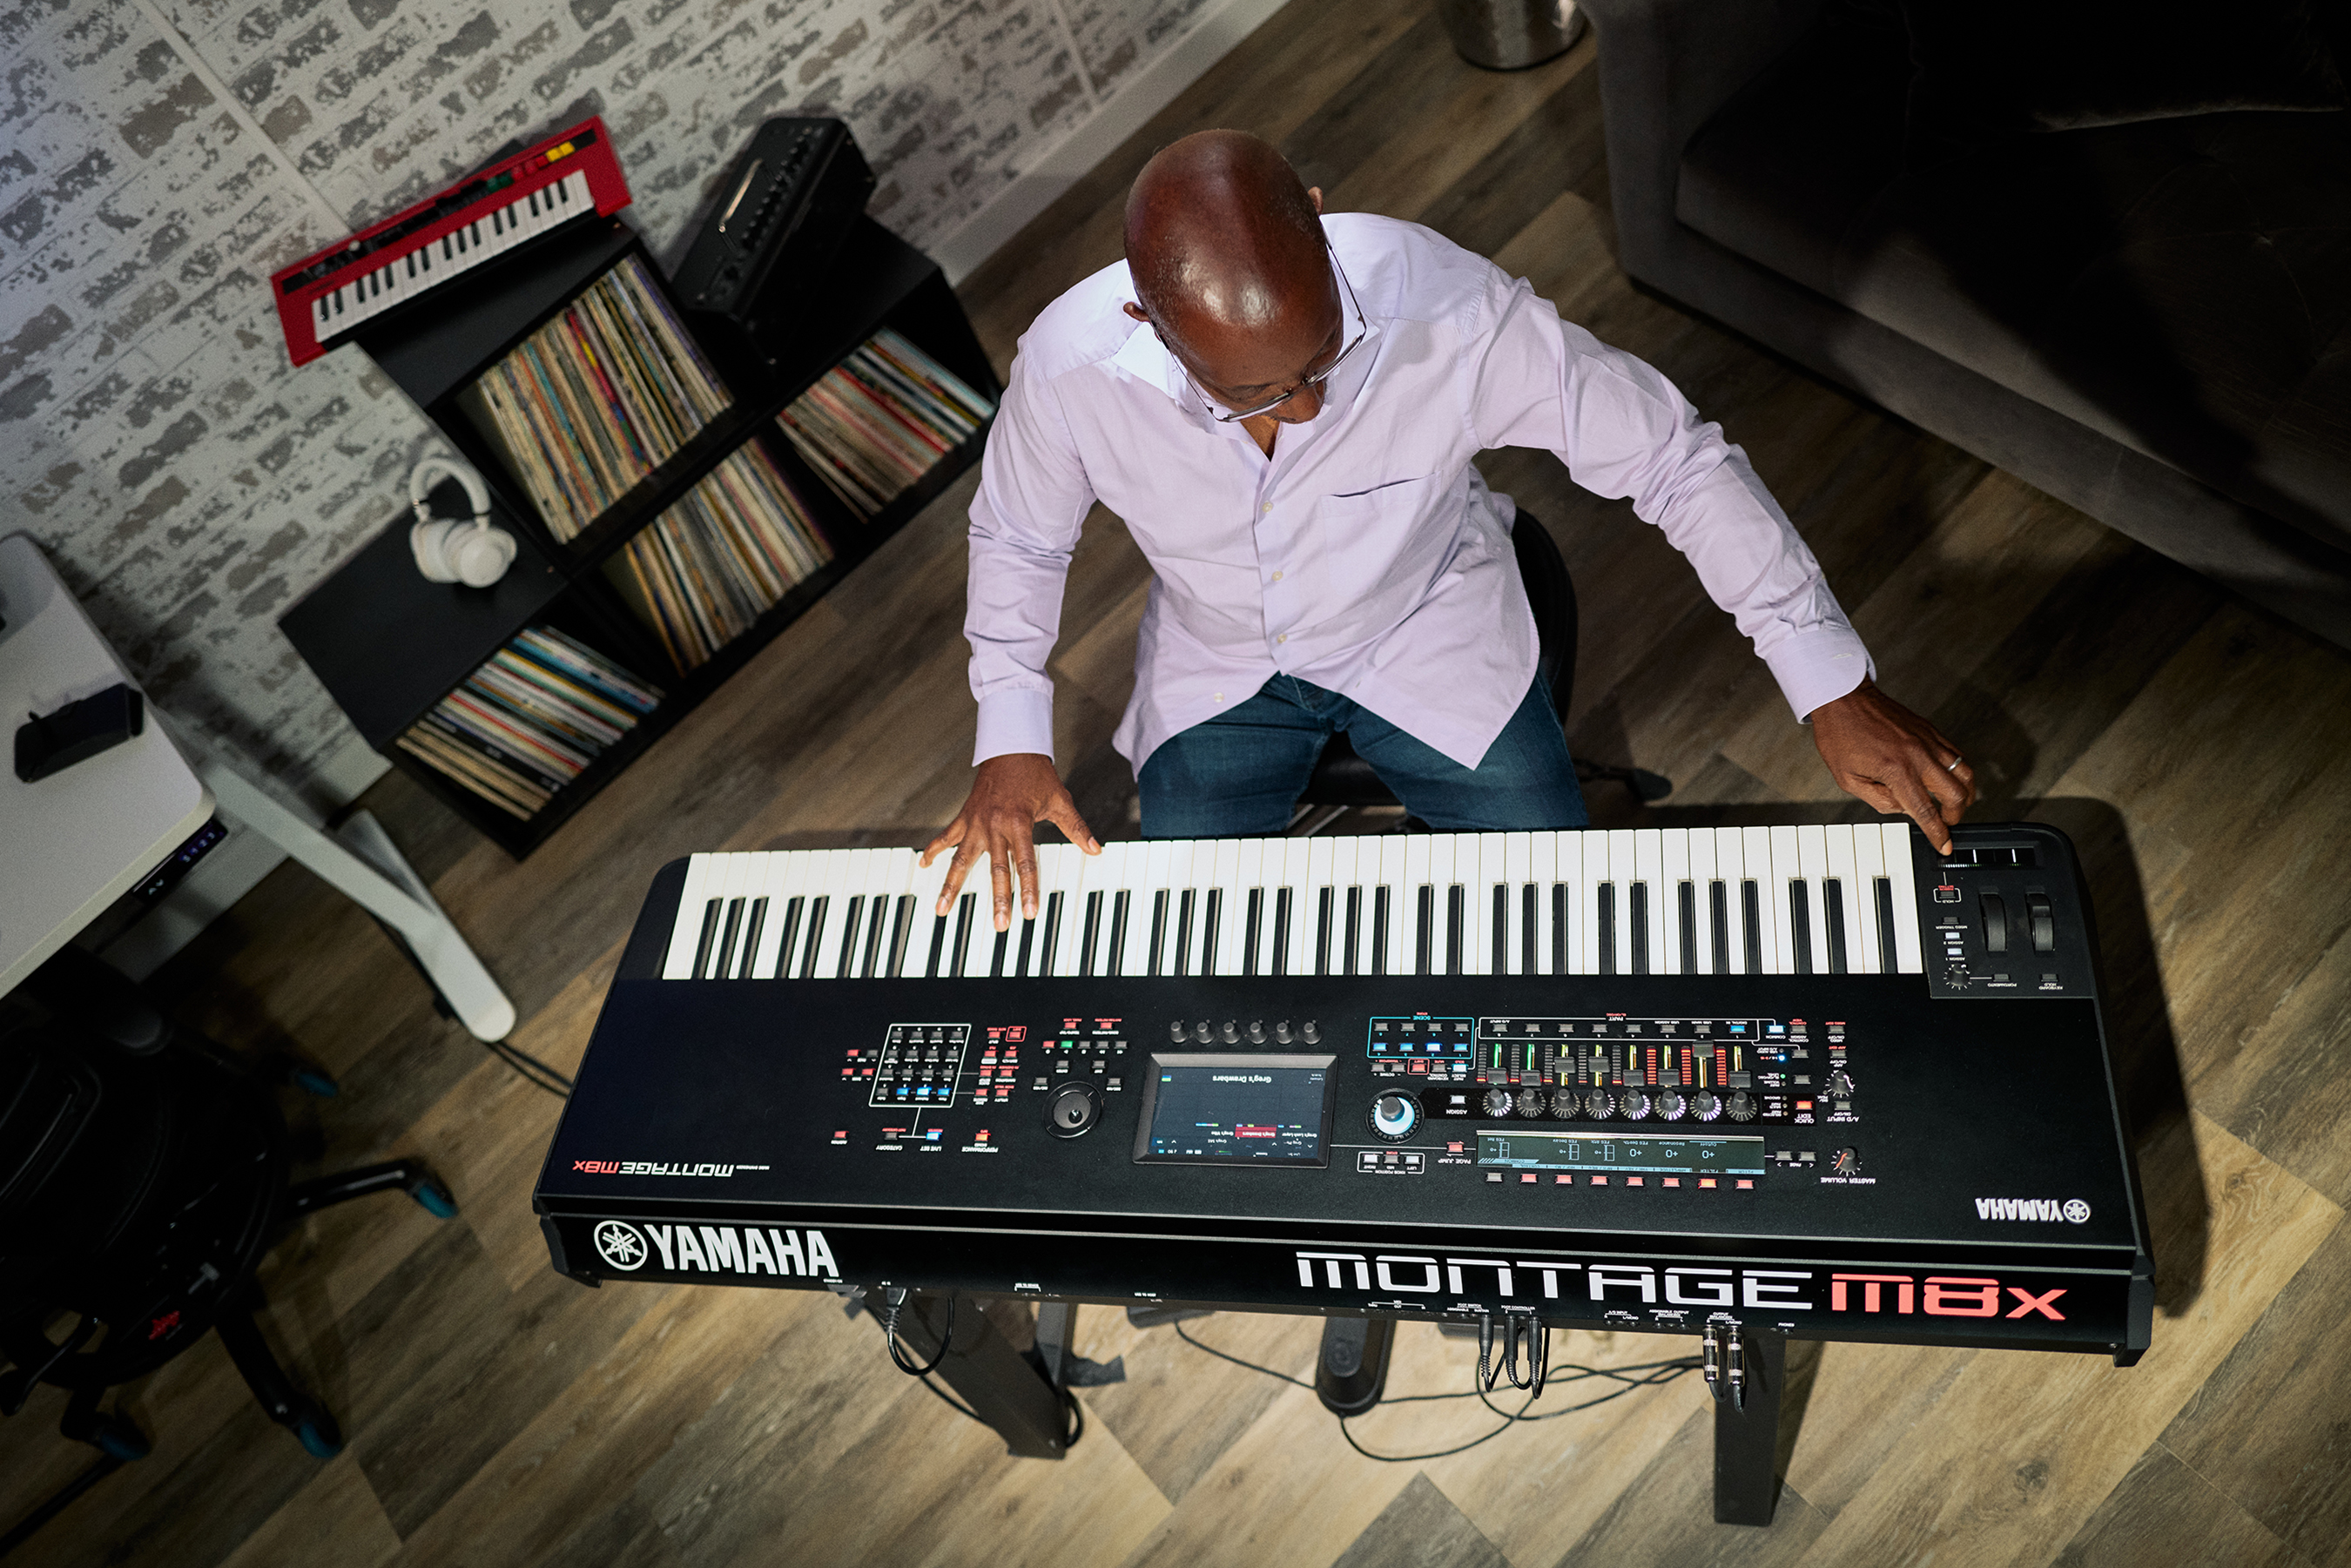 To learn more about the MONTAGE M synthesizers, please visit Yamaha.io/MONTAGEM.